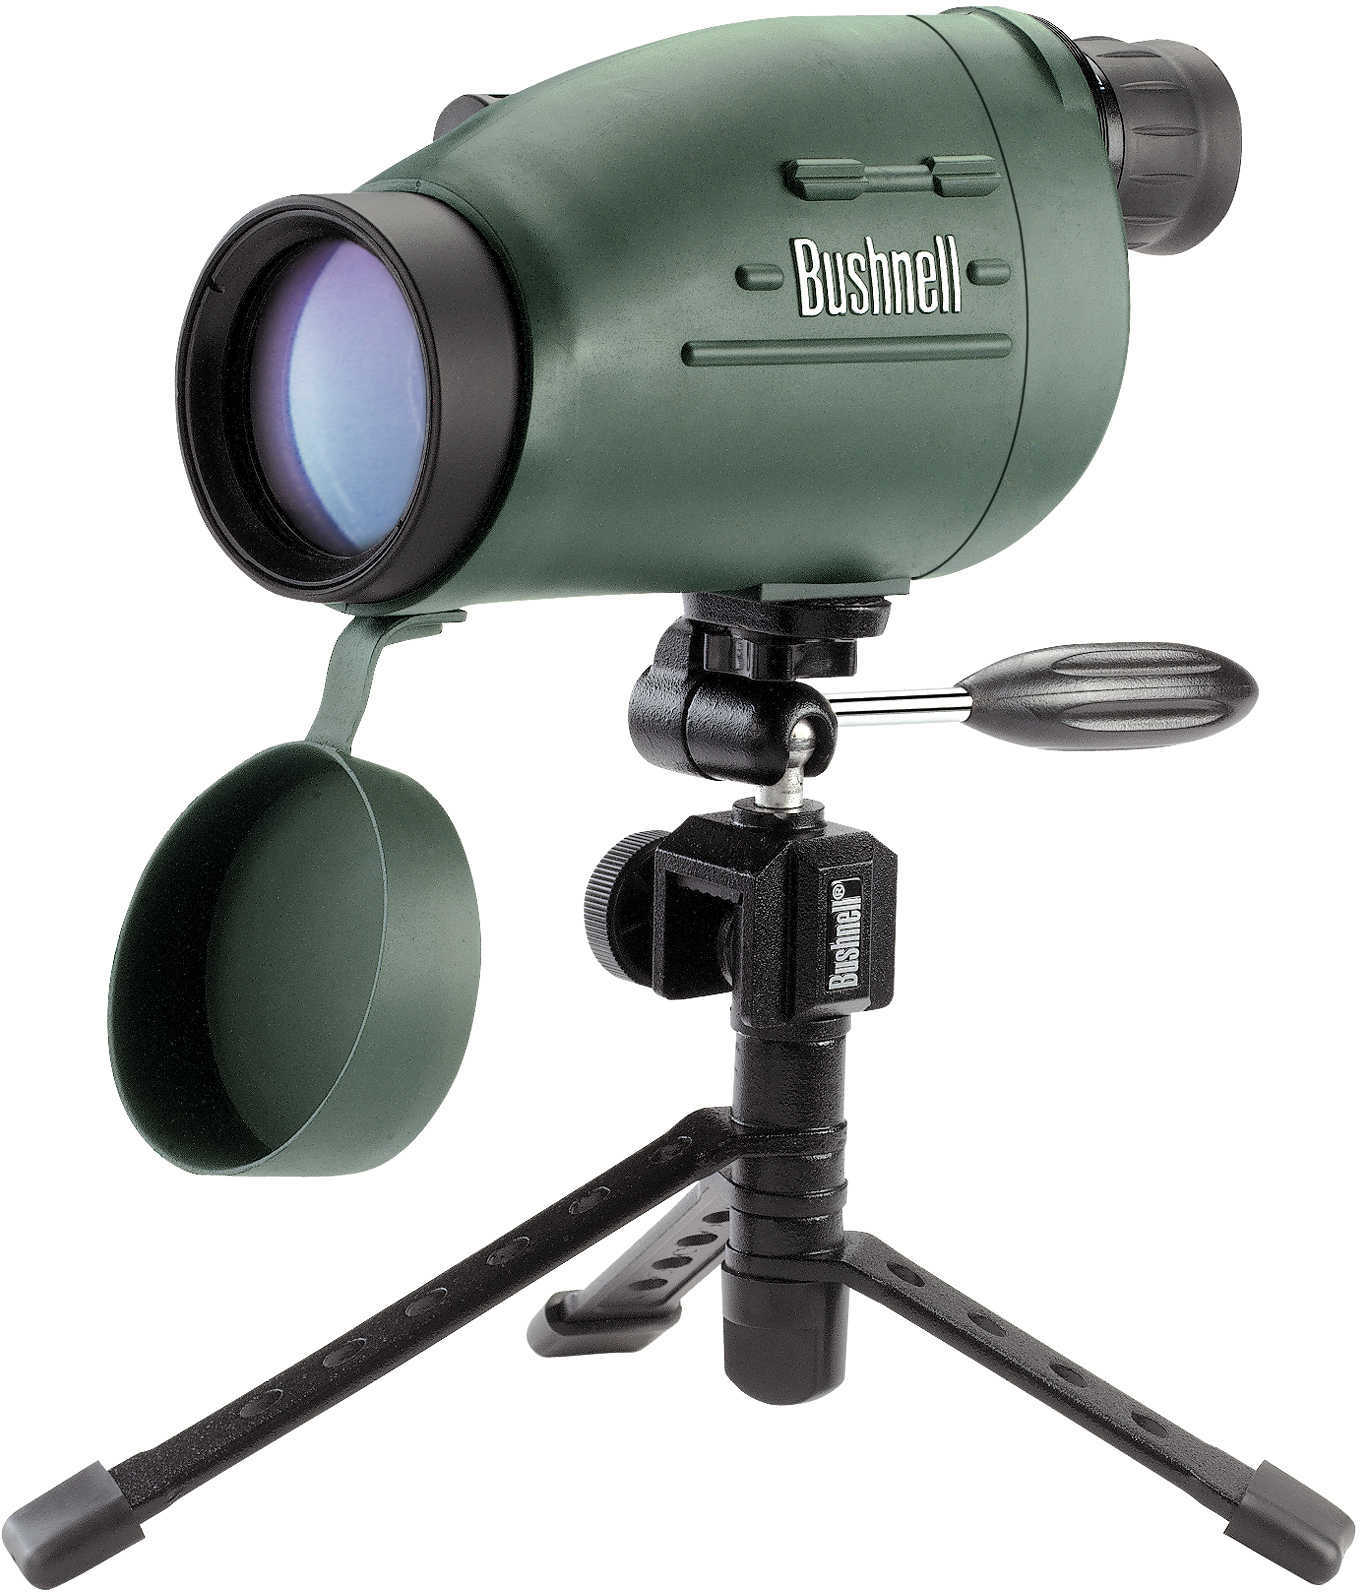 Bushnell Sentry 12-36X50mm Spotting Scope Multi-Coated Optics - Waterproof - Rubber Armor - Compact Tripod For Long-Rang